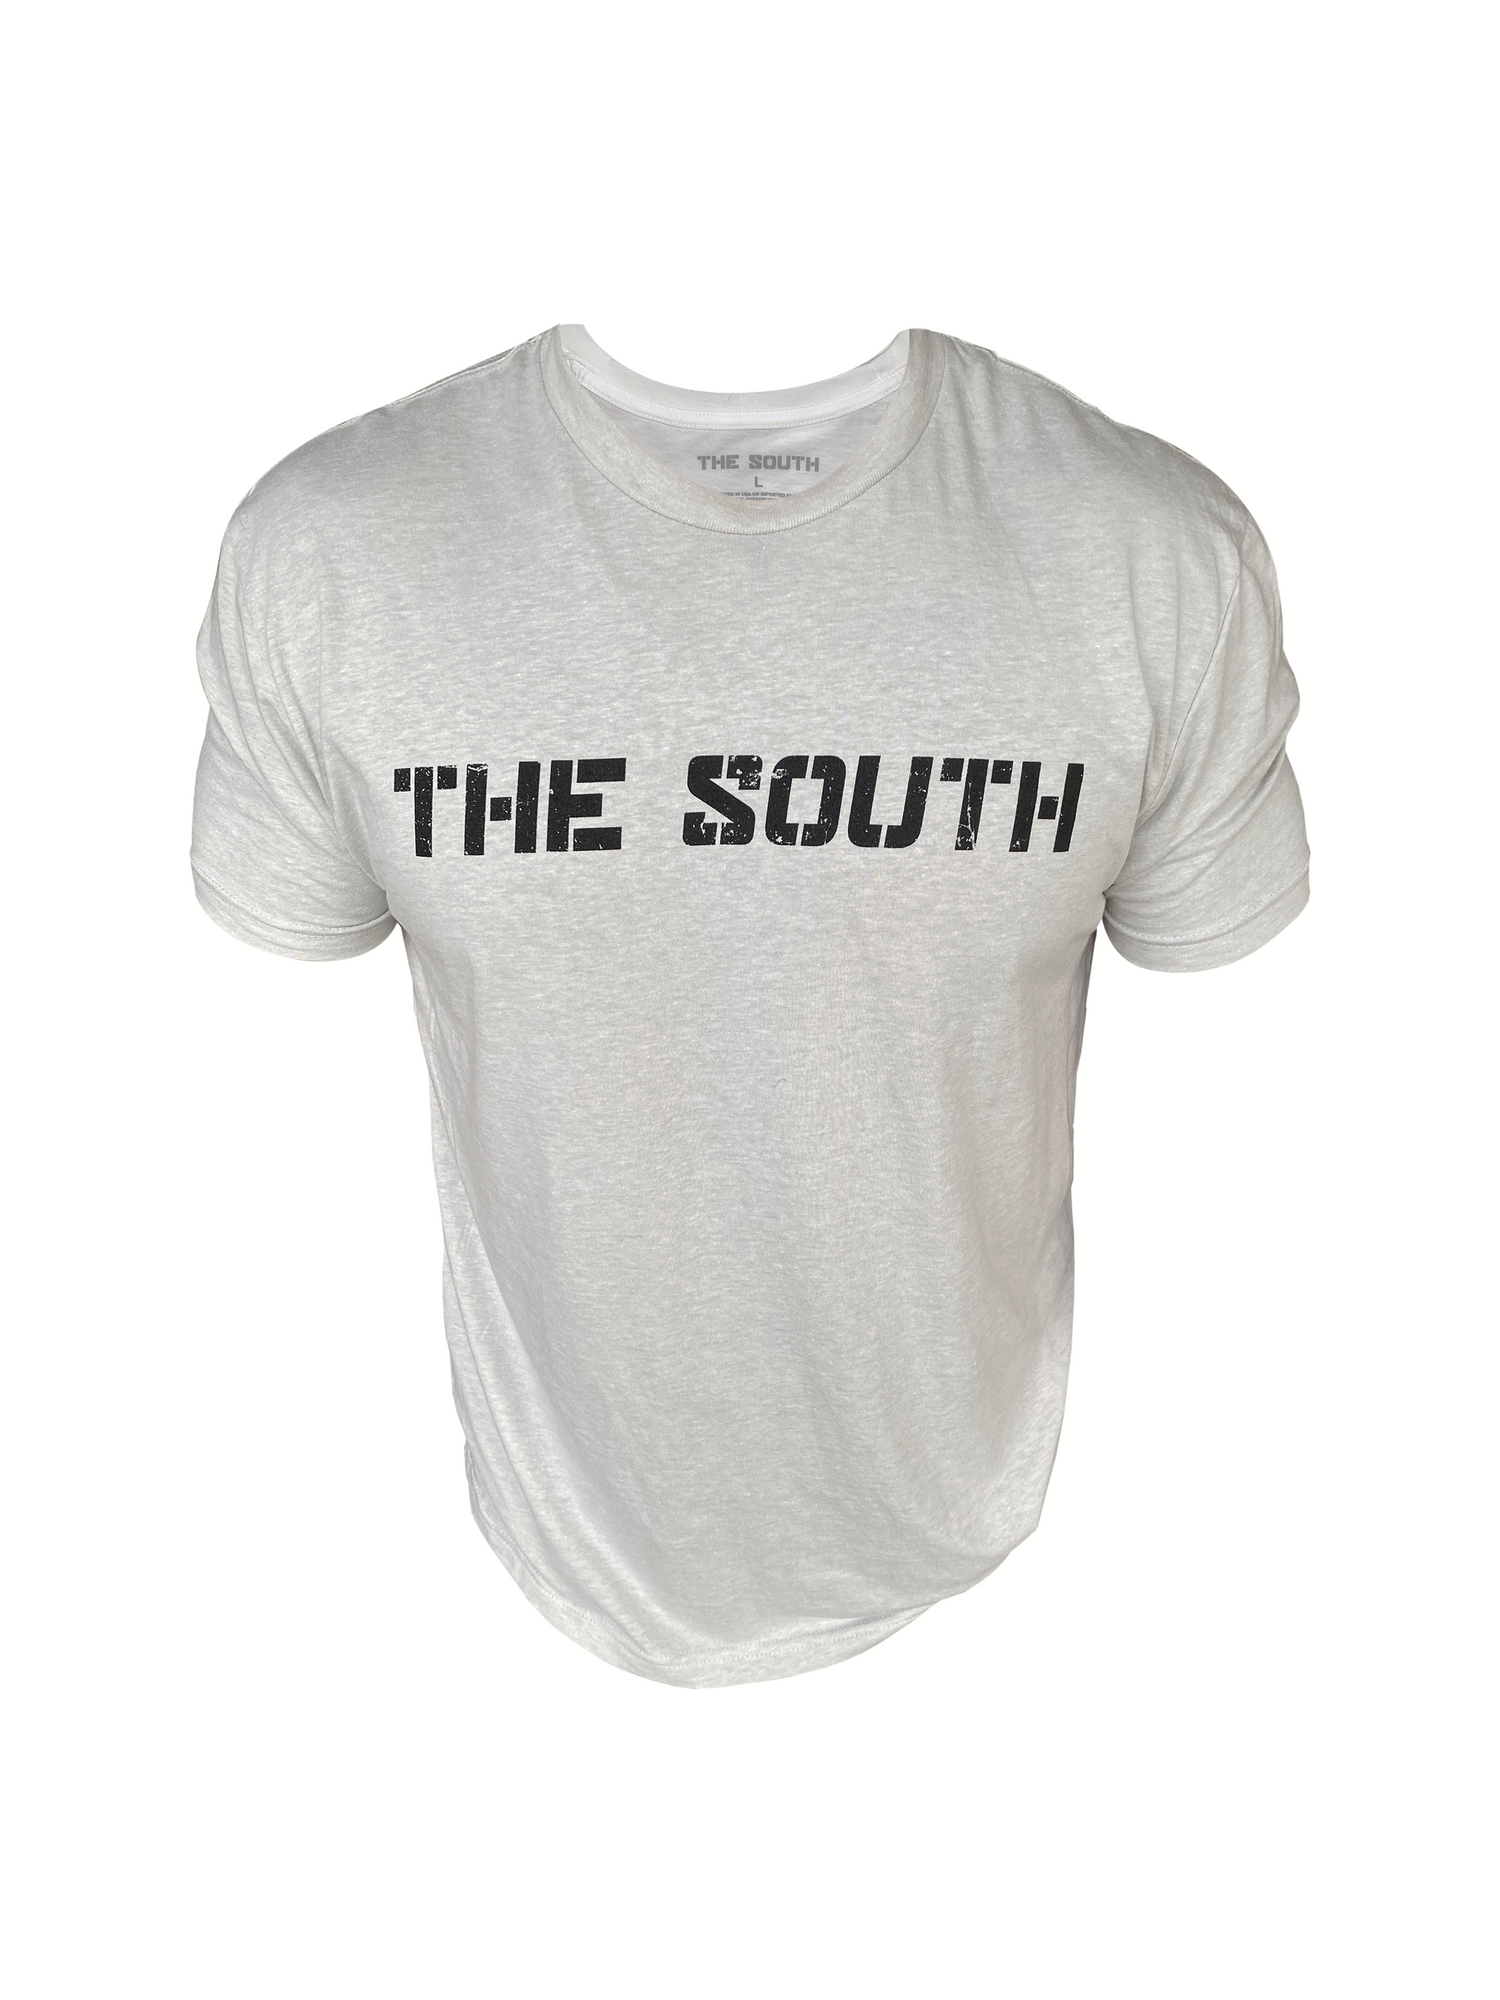 Sand Performance Tee - The South